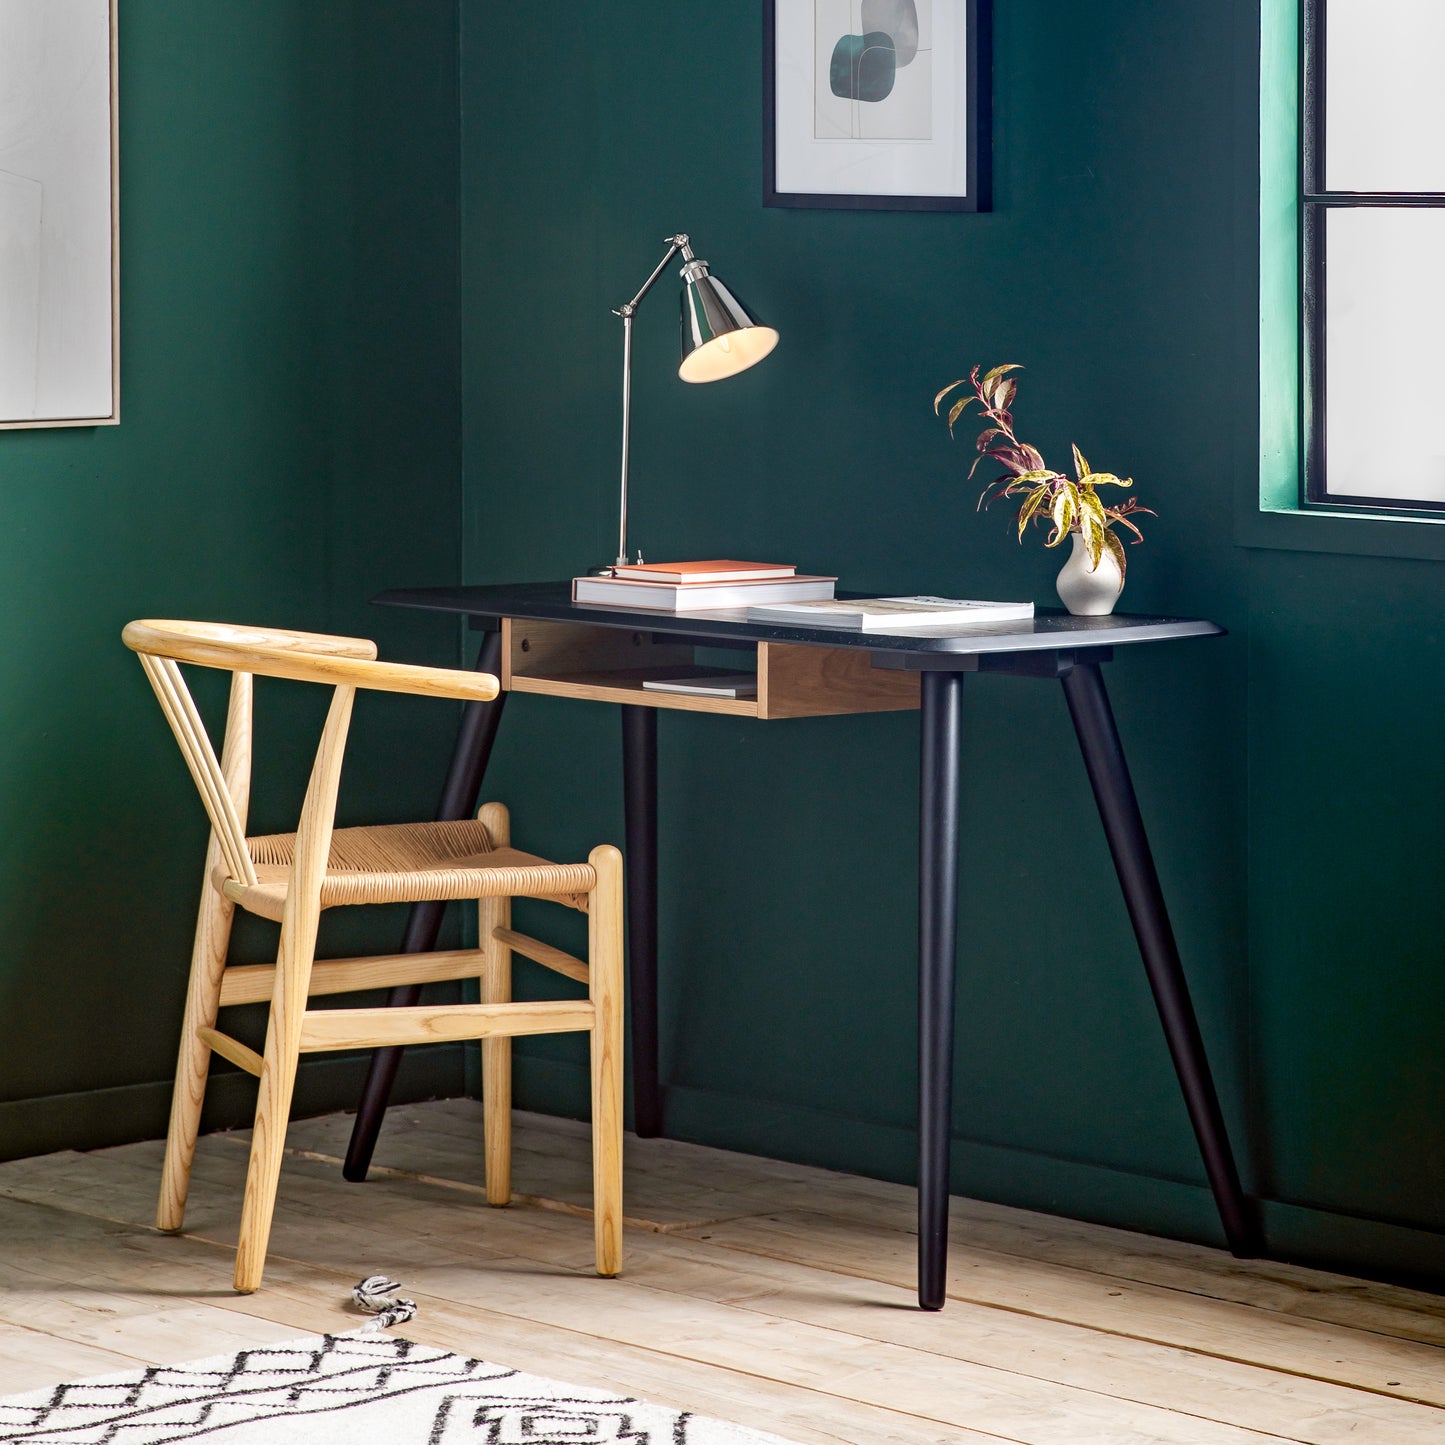 Interior decor, Home furniture: A Maddox Desk with Shelf 110x50x750mm and chair in a room with green walls seamlessly complement the interior decor with their stylish design.